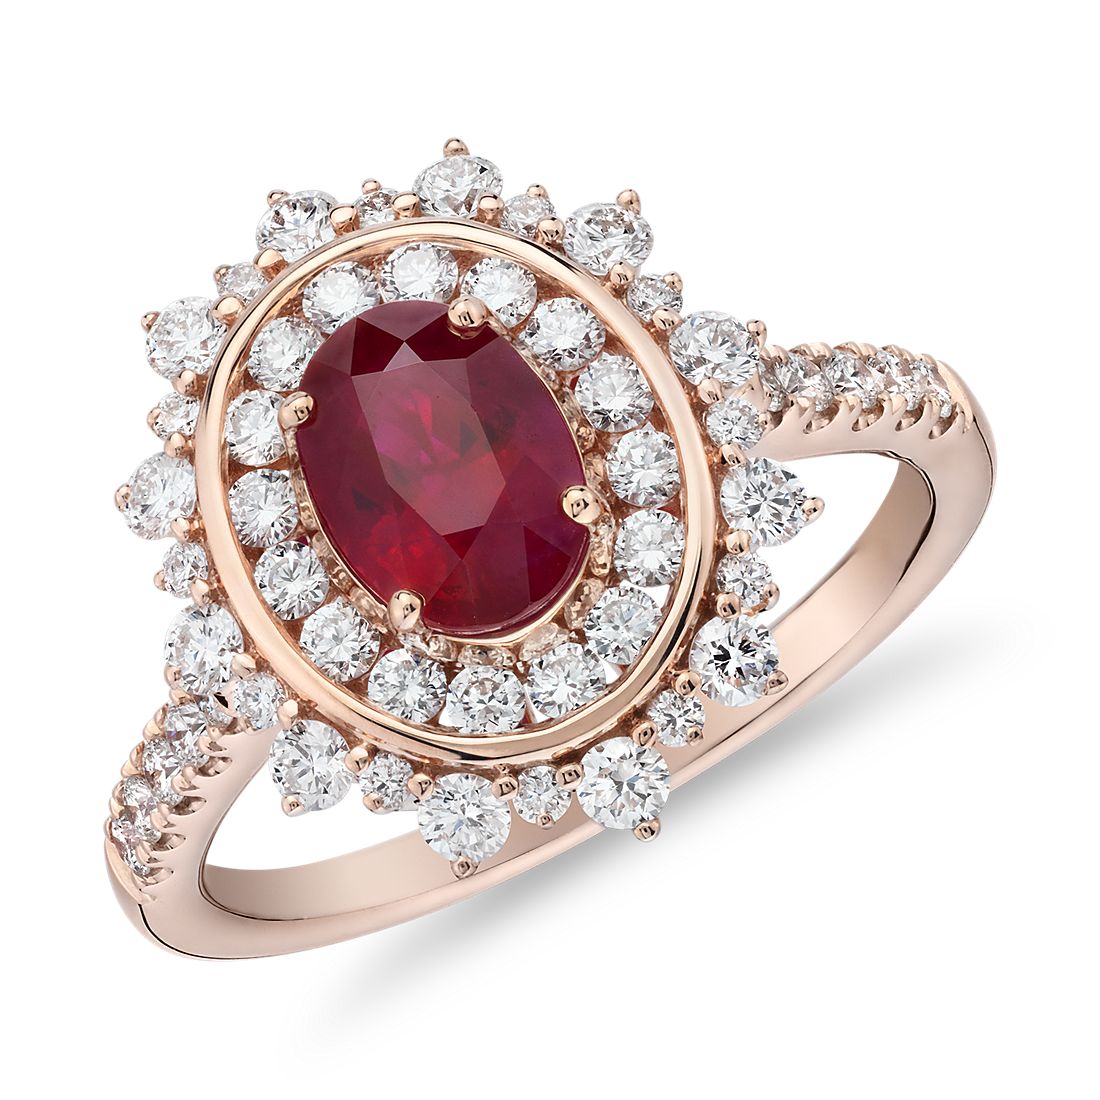 Oval Ruby Ring with Double Diamond Halo in 14k Rose Gold (7x5mm)